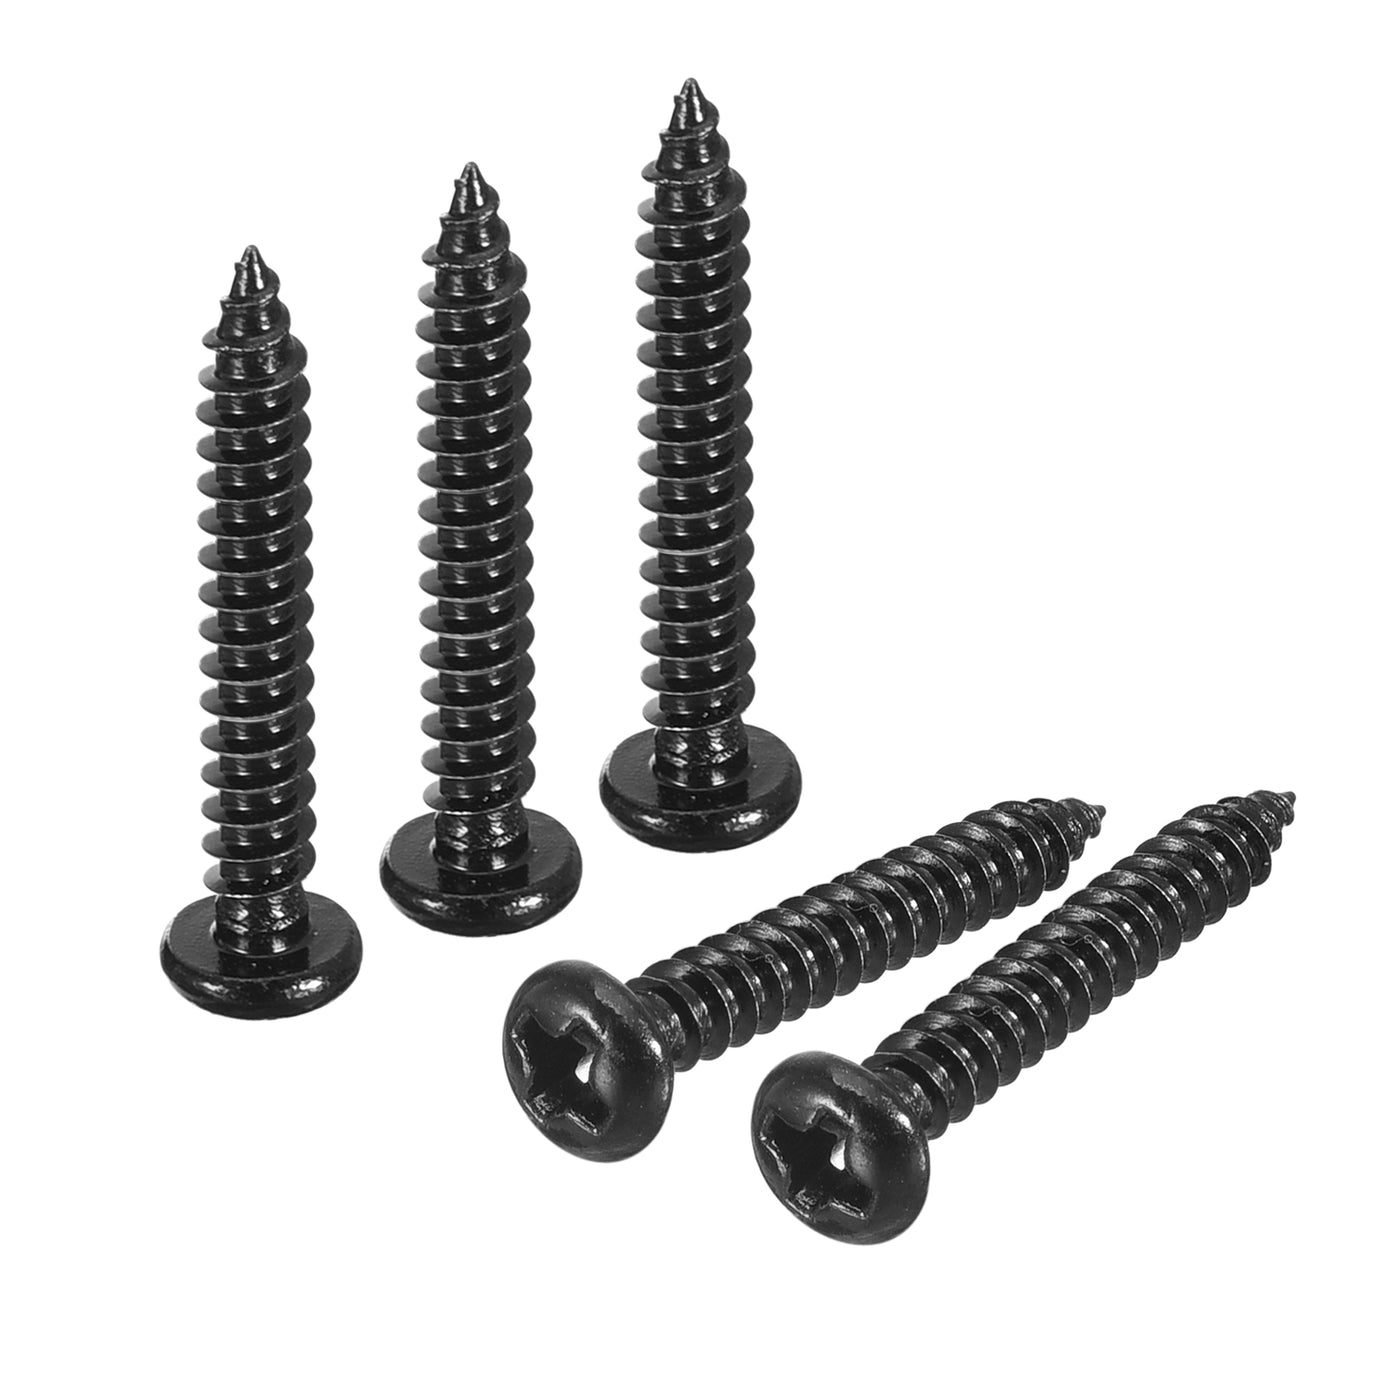 uxcell Uxcell 3mm x 20mm Phillips Pan Head Self-tapping Screw, 100pcs - 304 Stainless Steel Round Head Wood Screw Full Thread (Black)